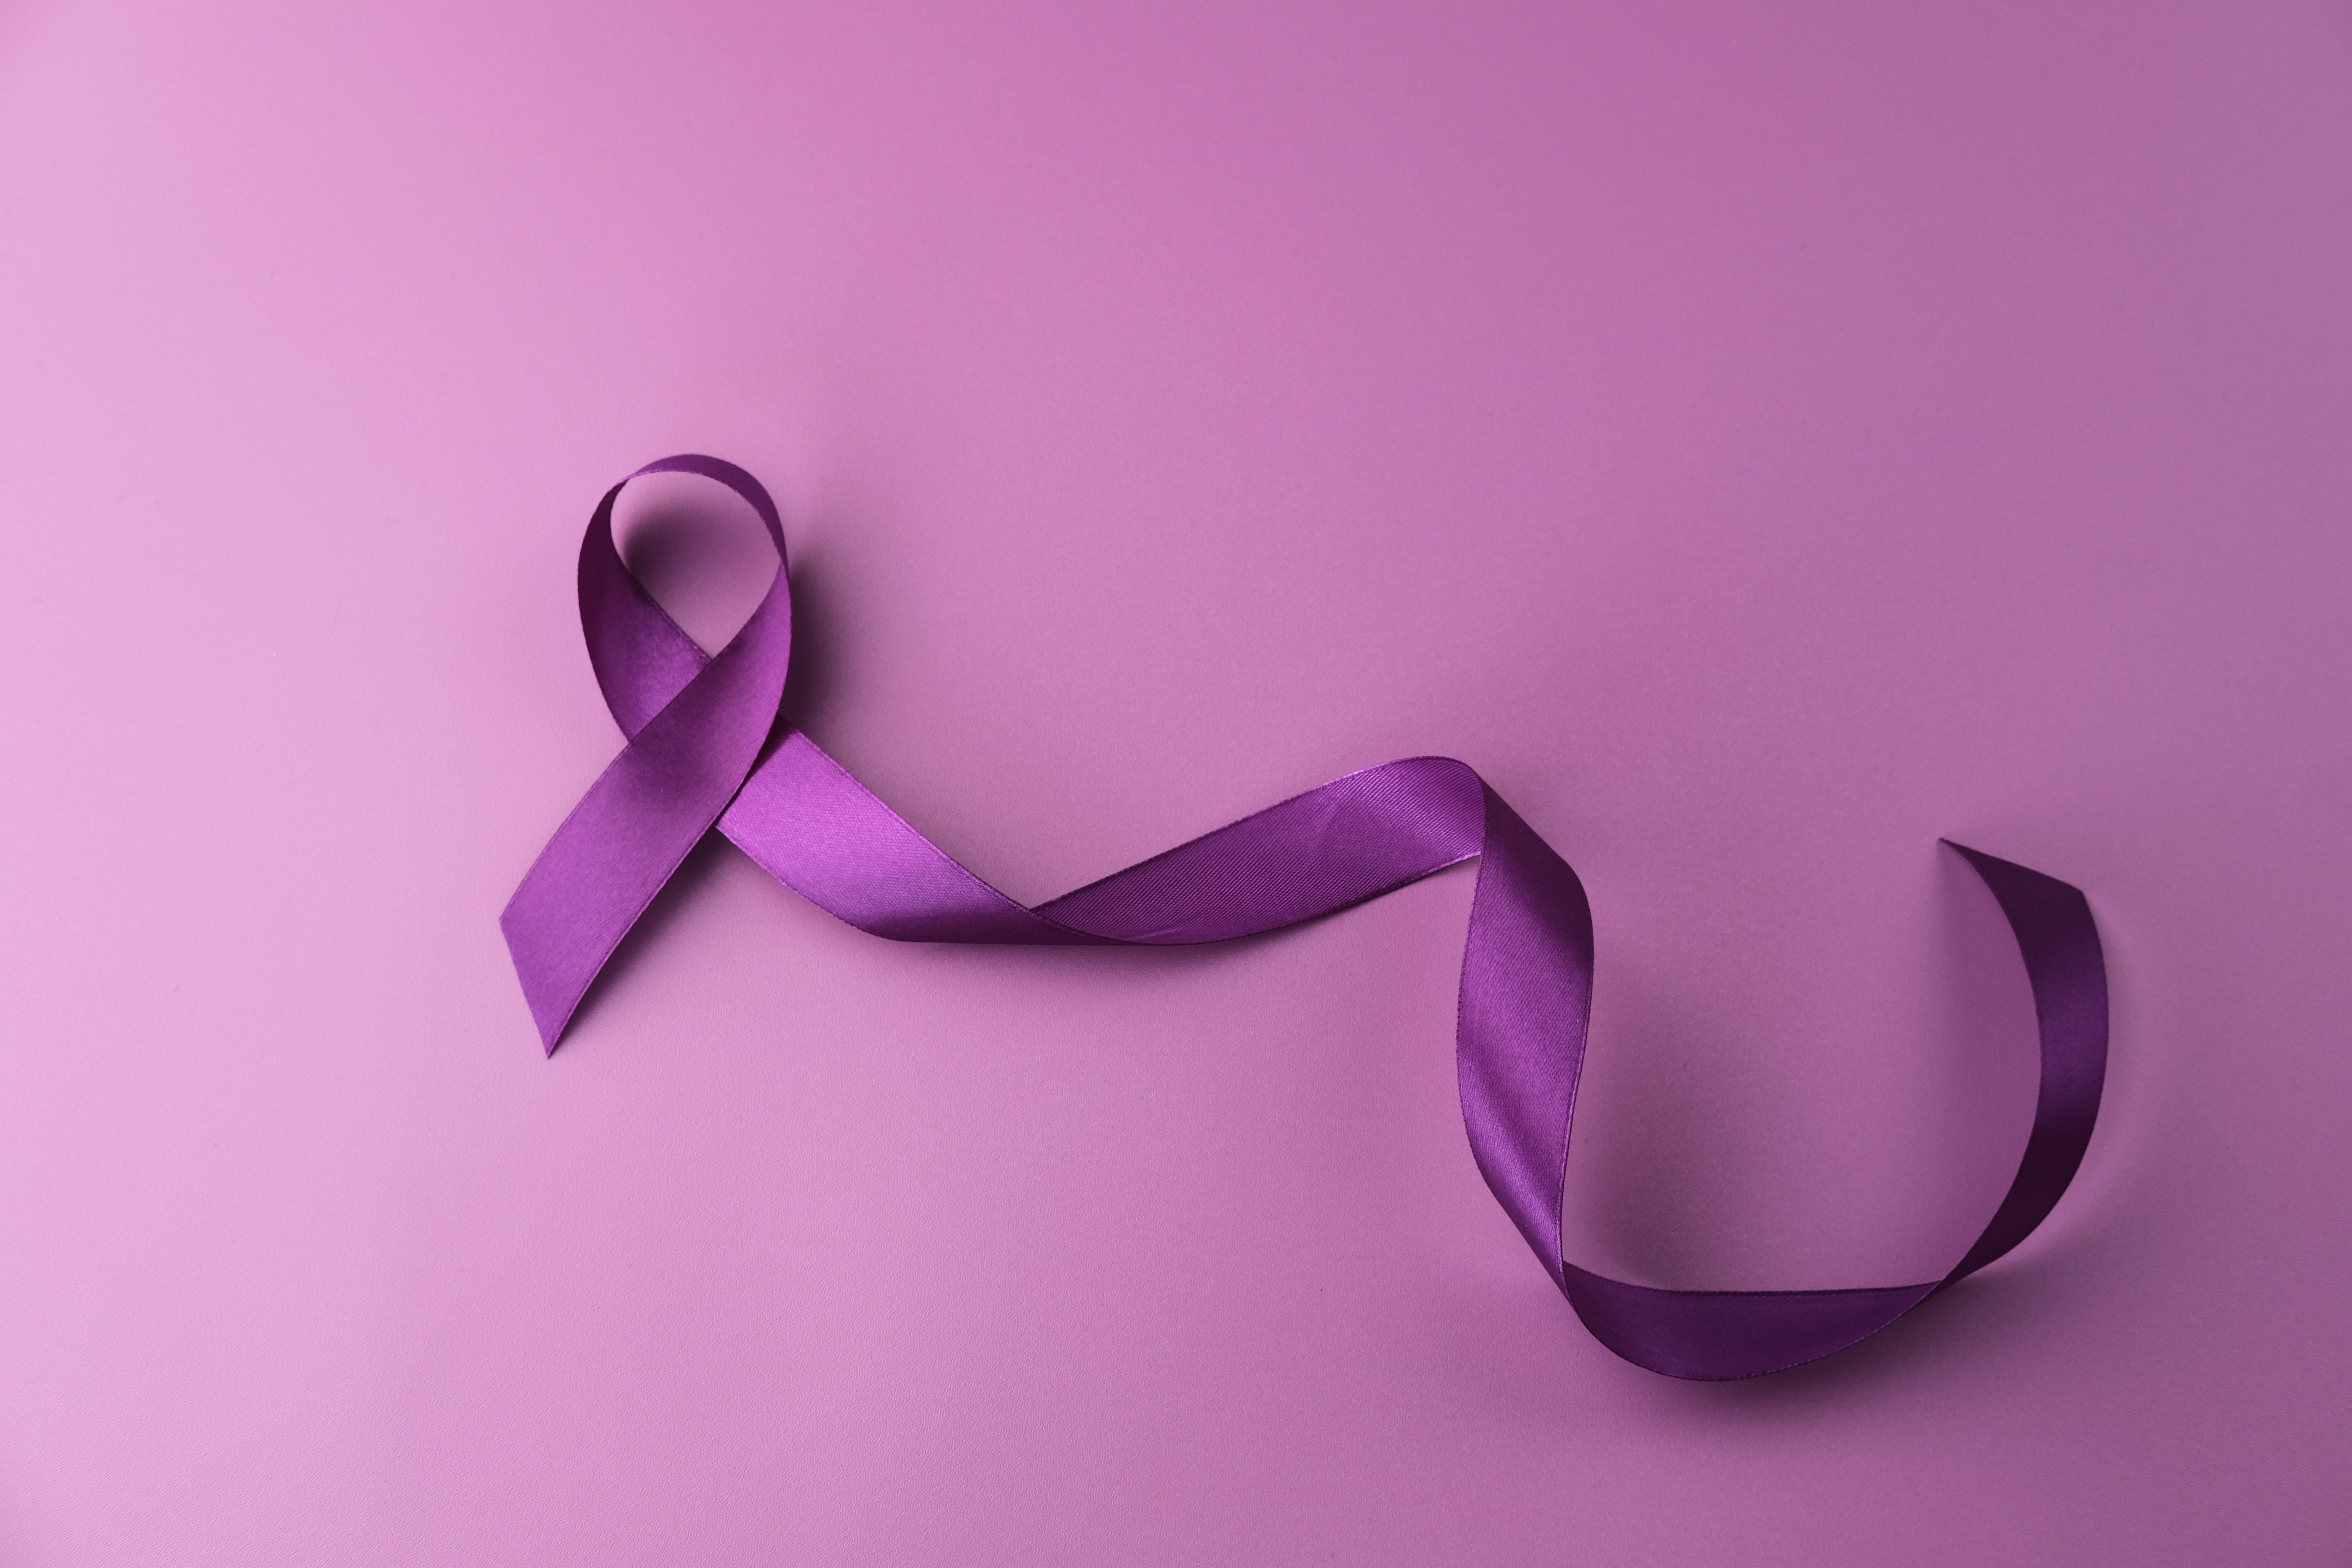 Epilepsy Awareness Day: 5 important facts